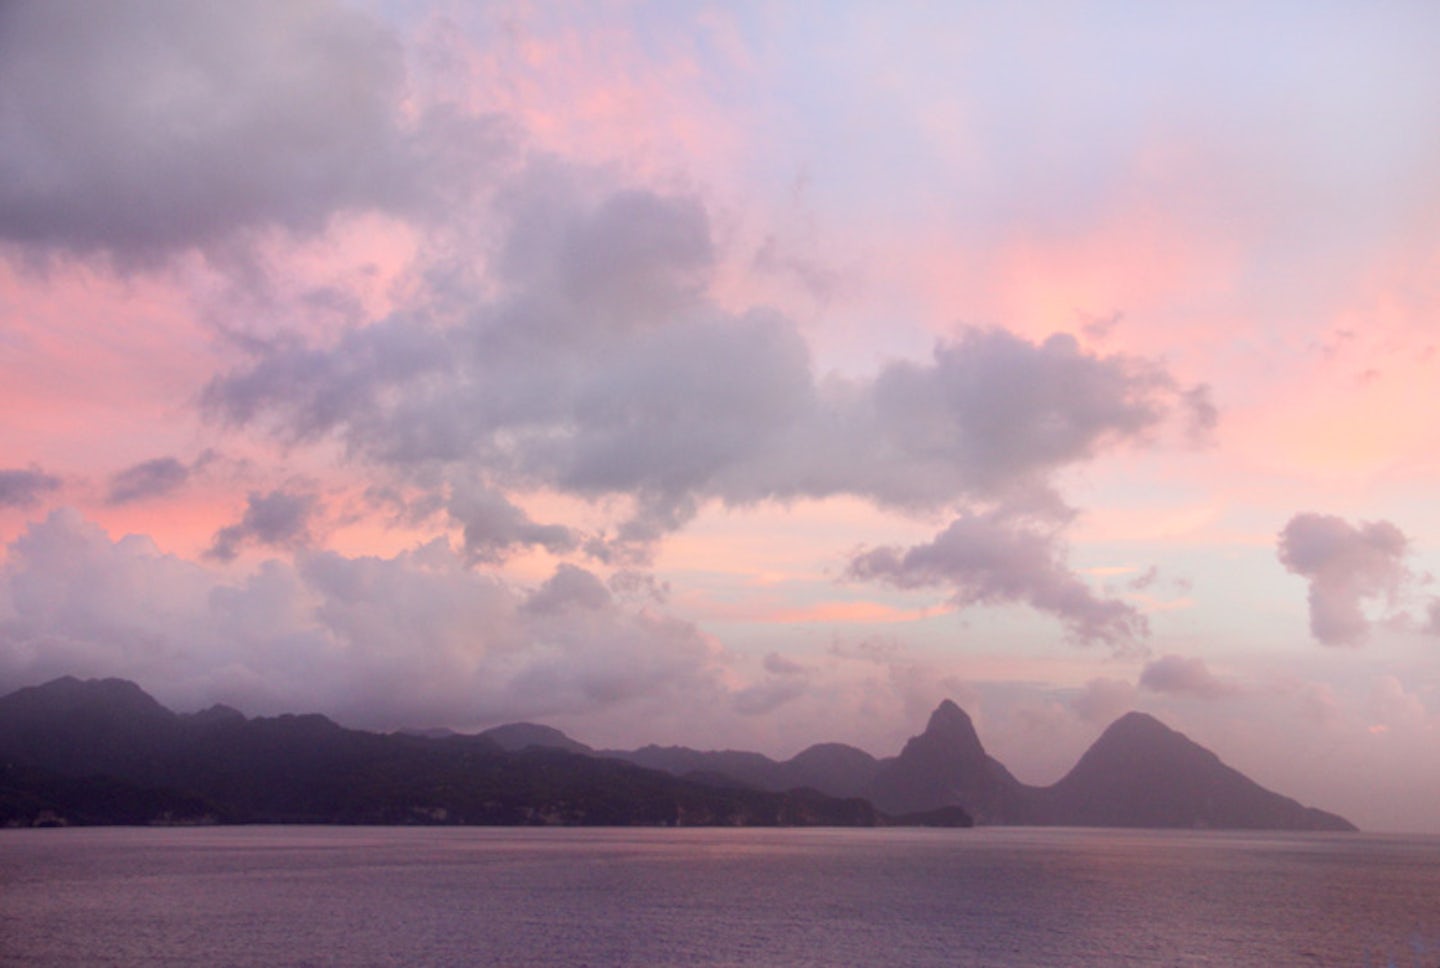 Sailing past the Pitons